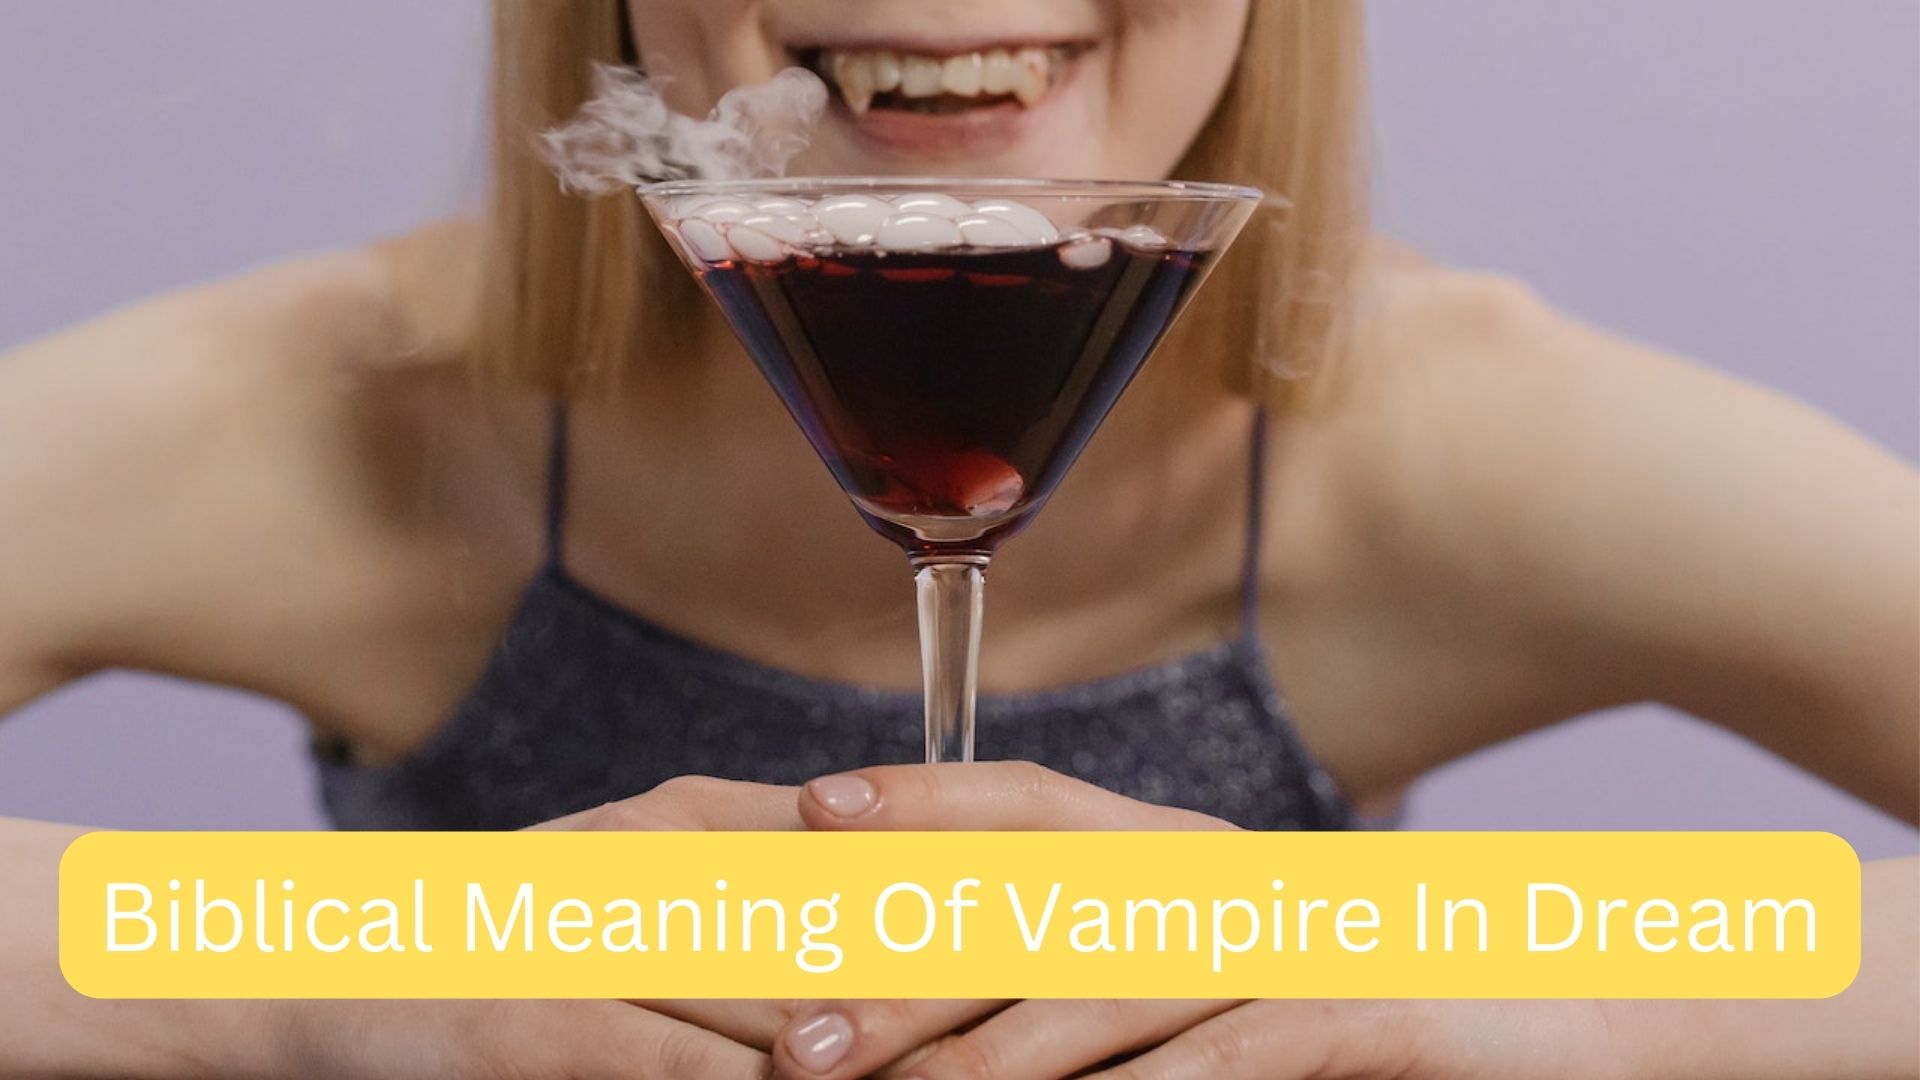 What Is The Biblical Meaning Of Vampire In Dream?